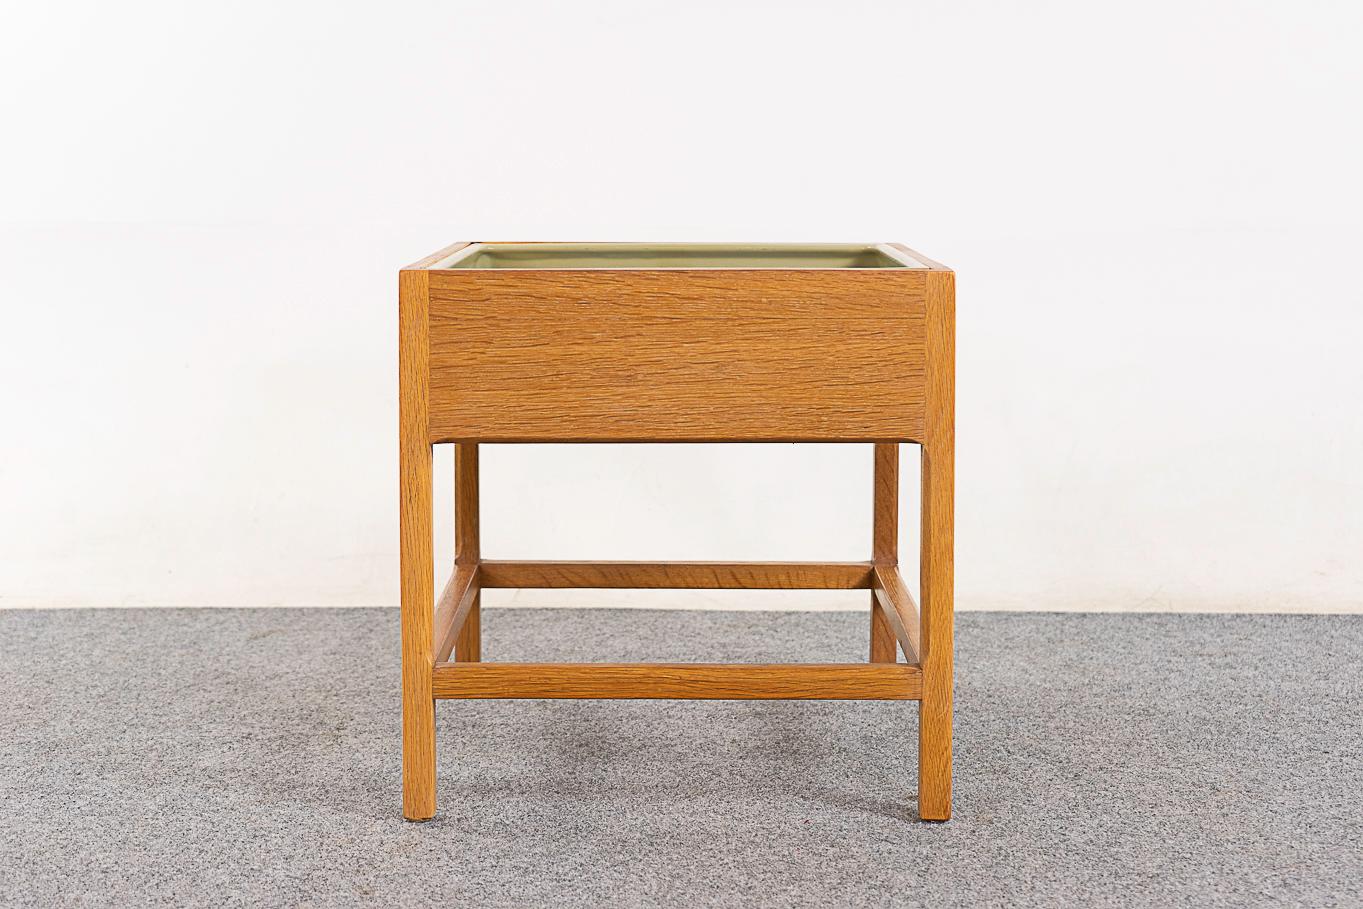 Oak mid-century planter by Kai Kristiansen for Aksel Kjersgaard, circa 1960's. Solid oak legs and crossbars, veneer constructed flat surfaces. Unique bevelled cubic underframe and original plastic lining with wear. 